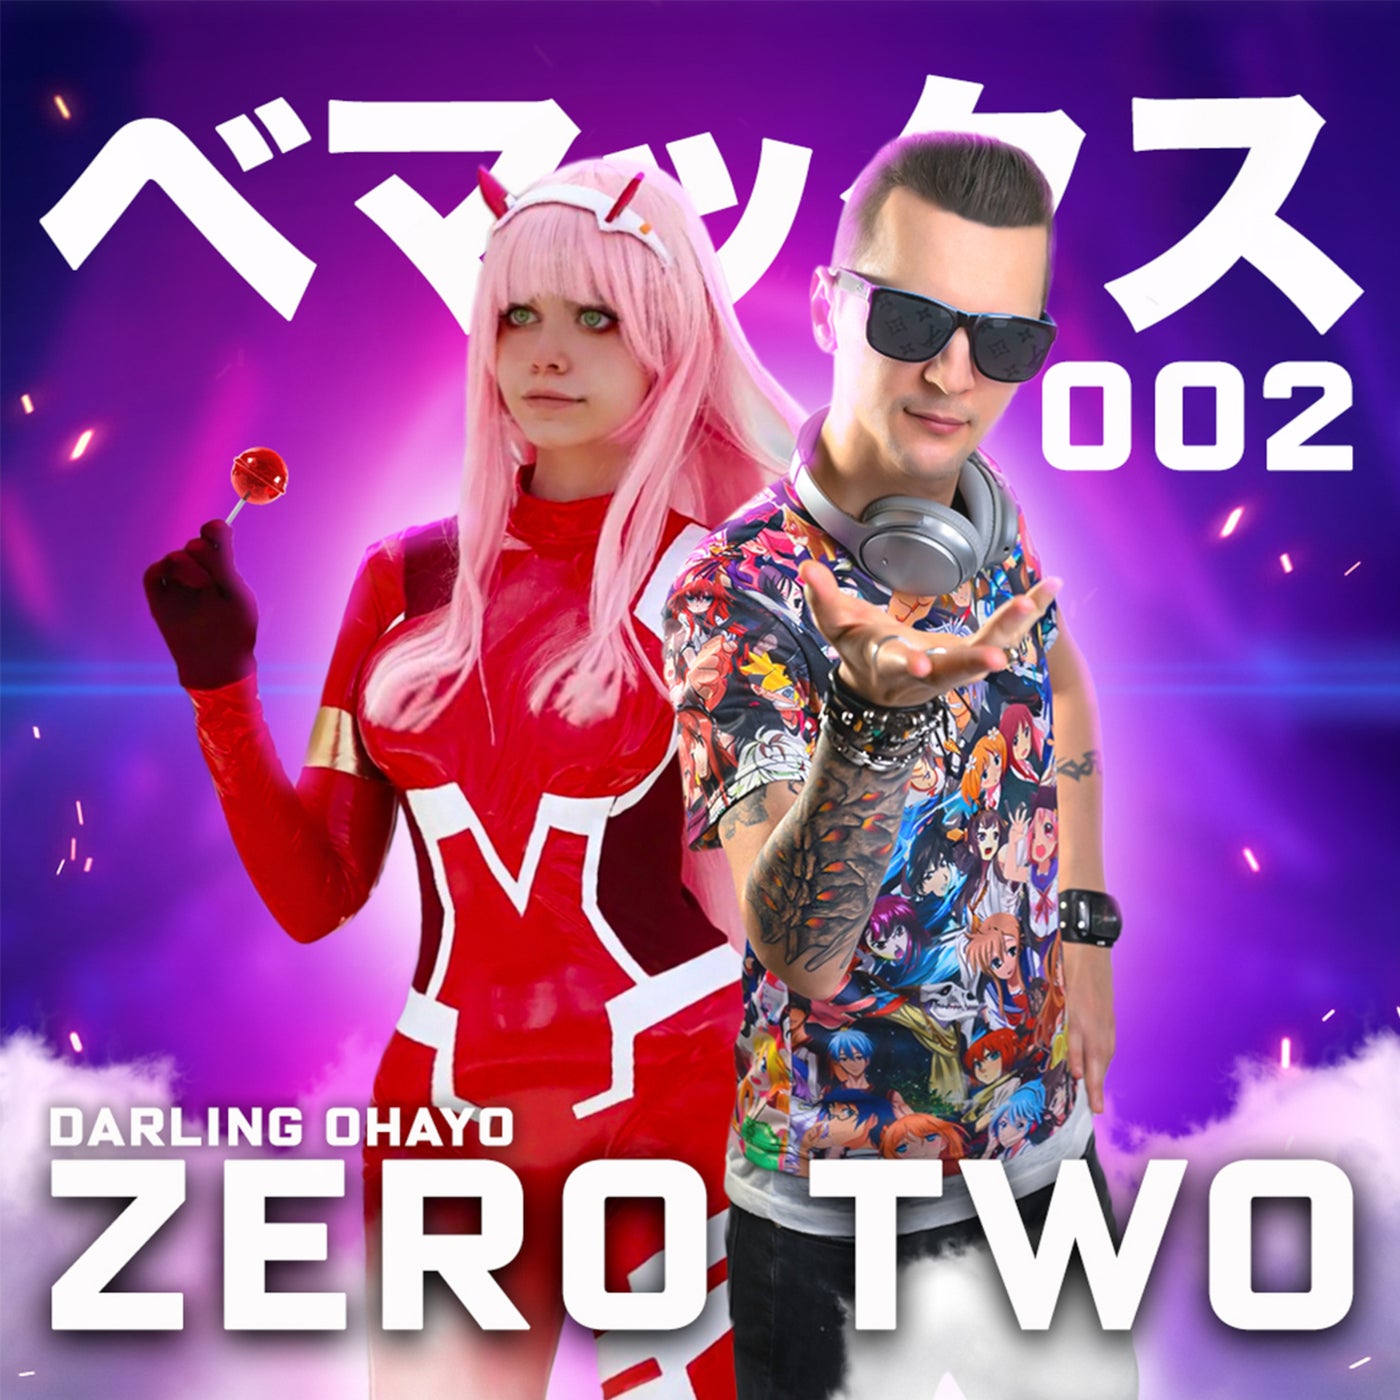 Darling Ohayo - HIFDY Remix - song and lyrics by Zero Two, HIFDY